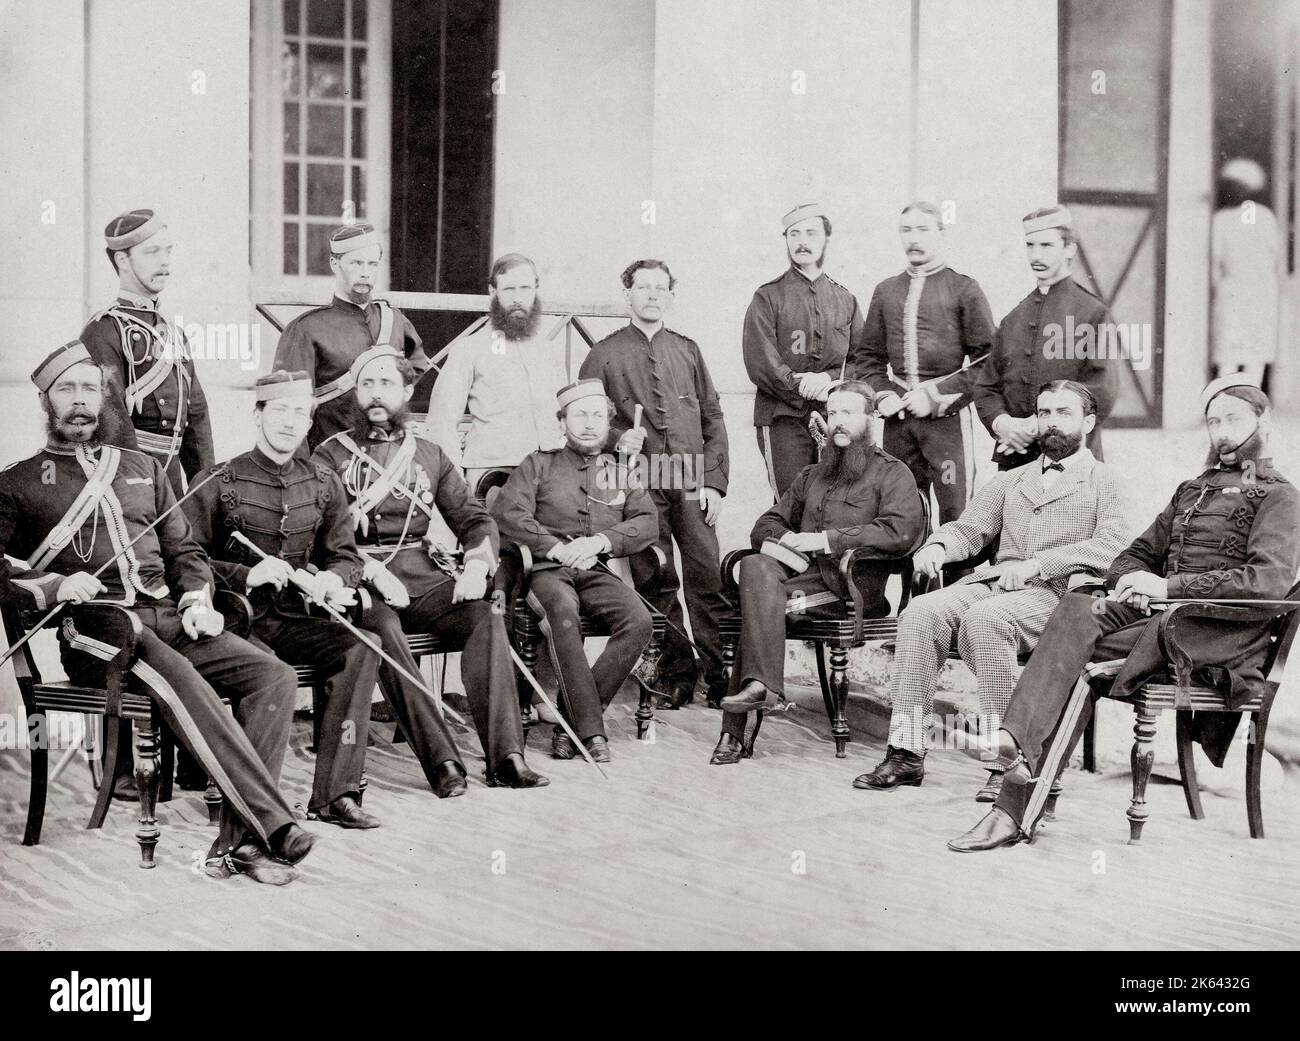 Vintage 19th century photograph - British army in India - officers of the 5th Lancers 1865 Stock Photo